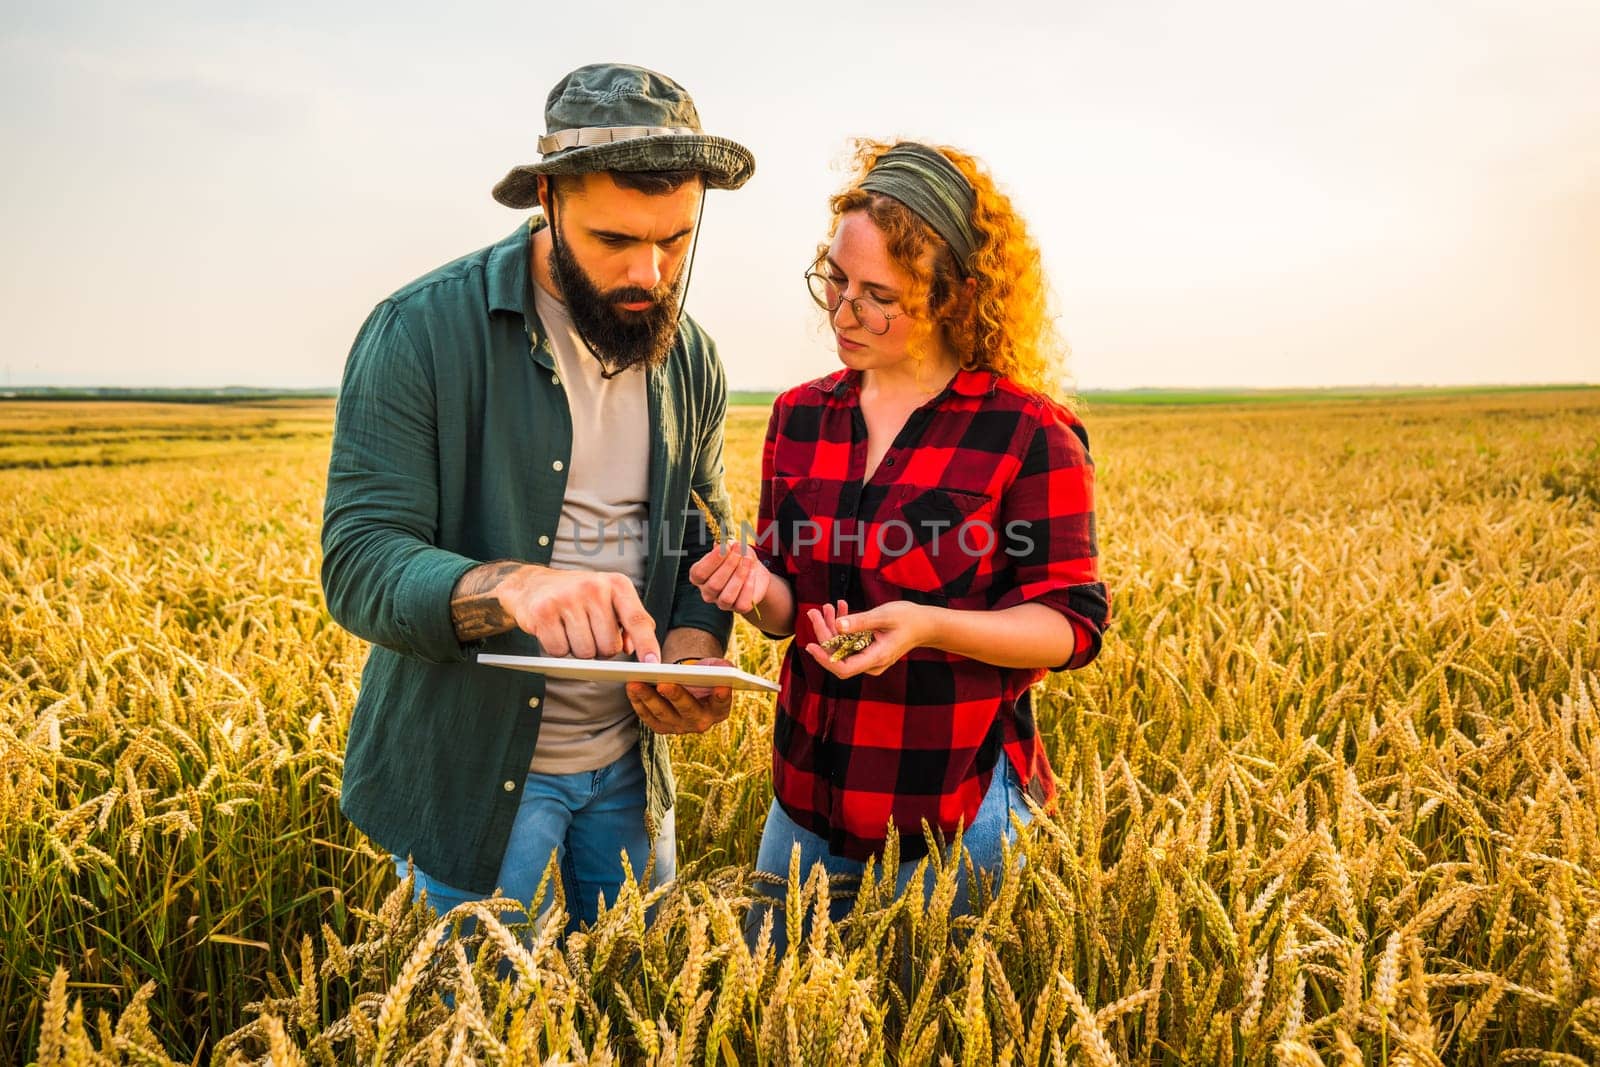 Family agricultural occupation. Man and woman are cultivating wheat. They are examining progress of plants.